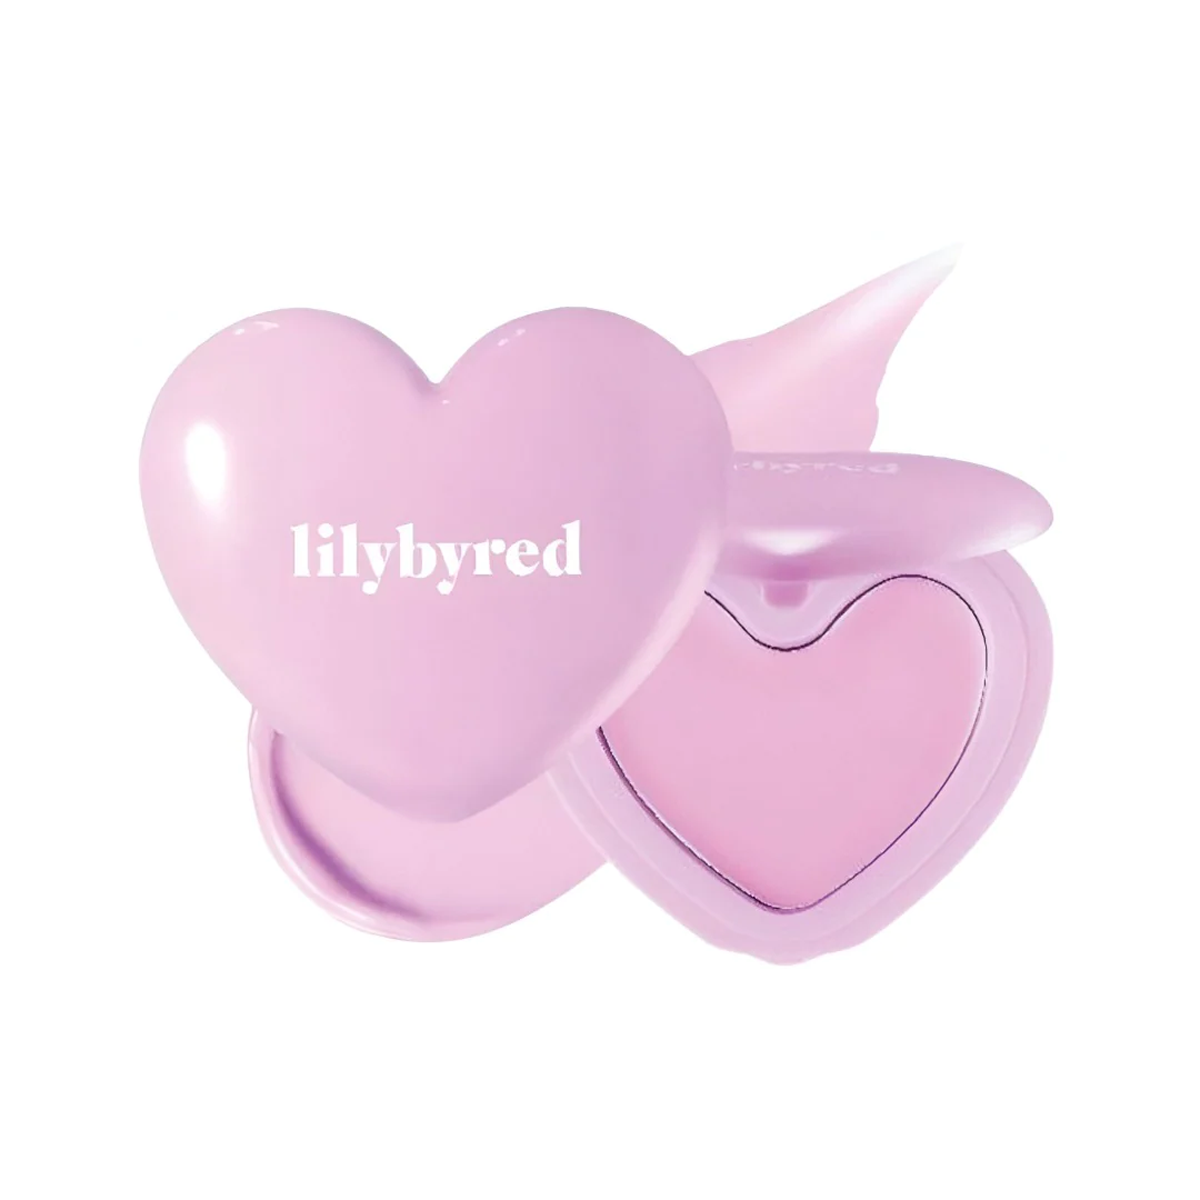 Lilybyred Luv Beam Cheek Balm for Glowing Skin - Korean Cosmetic, Hydrating & Pigmented Cheek Color, Easy Blend Formula for Luminous Finish - Blush Makeup